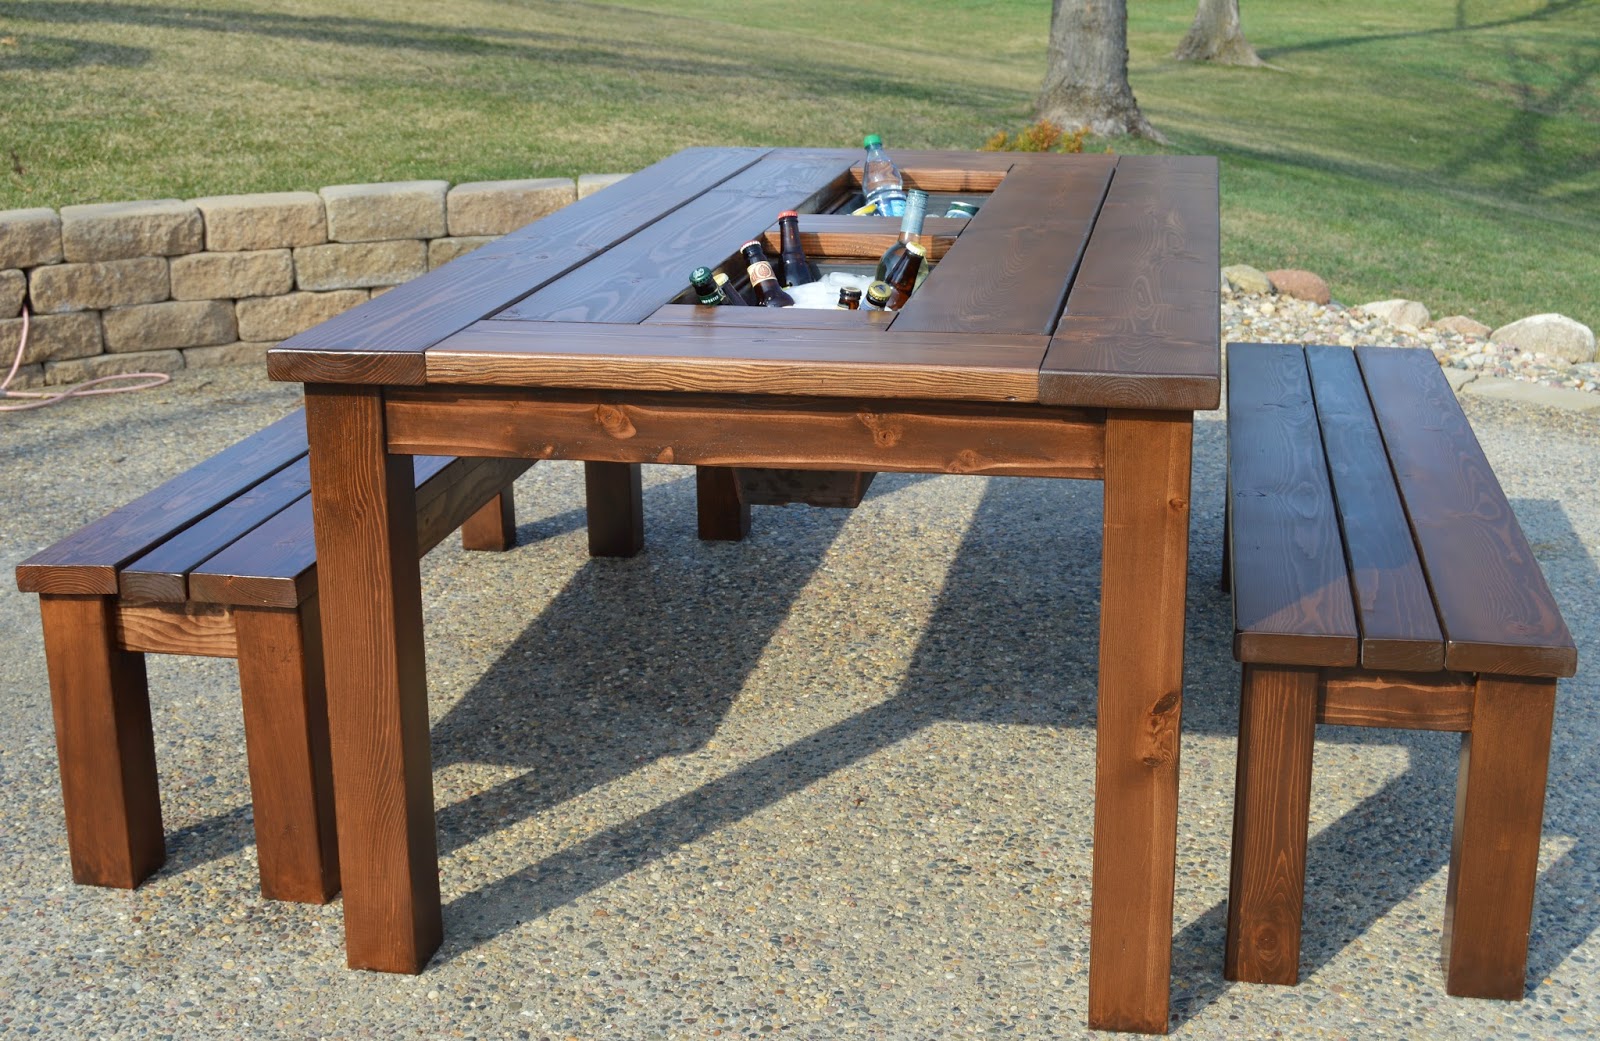 Building Plans Outdoor Table